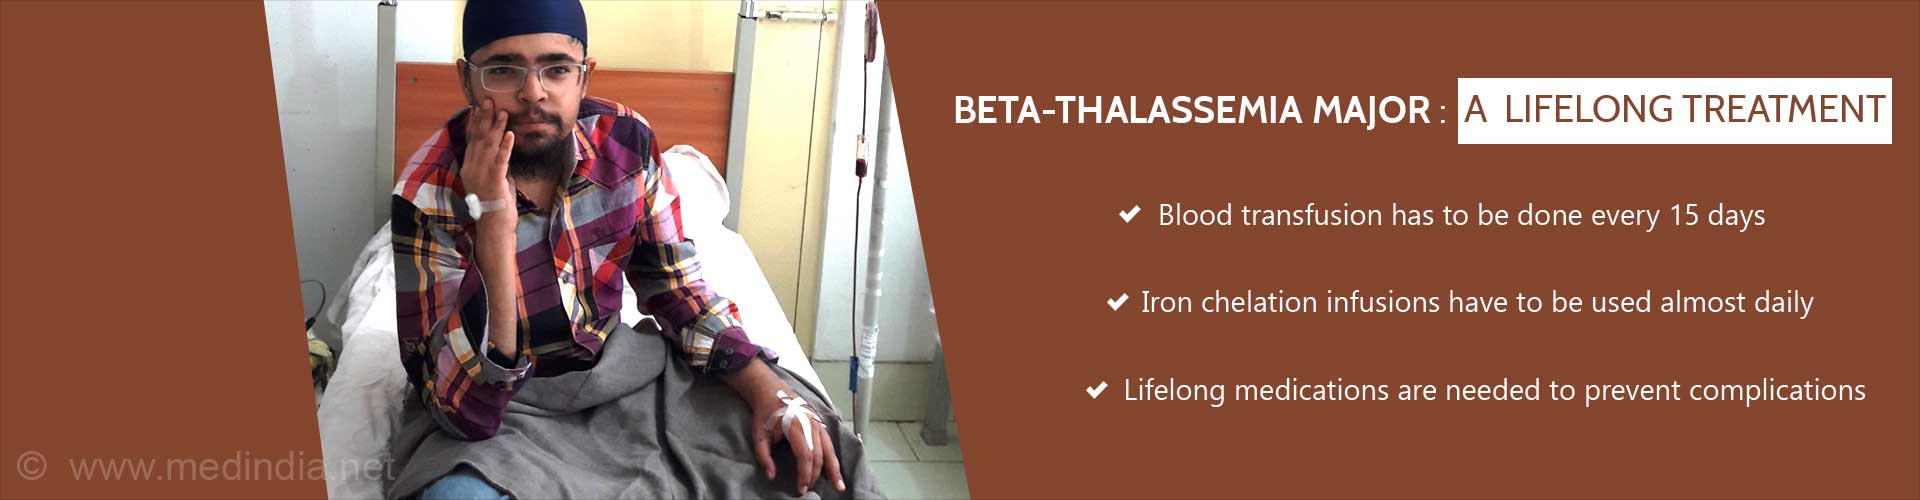 BETA-THALASSEMIA MAJOR: A Lifelong Treatment
- Blood transfusion has to be doe every 15 days
- Iron chelation infusions have to be used almost daily
- Lifelong medications are needed to prevent complications